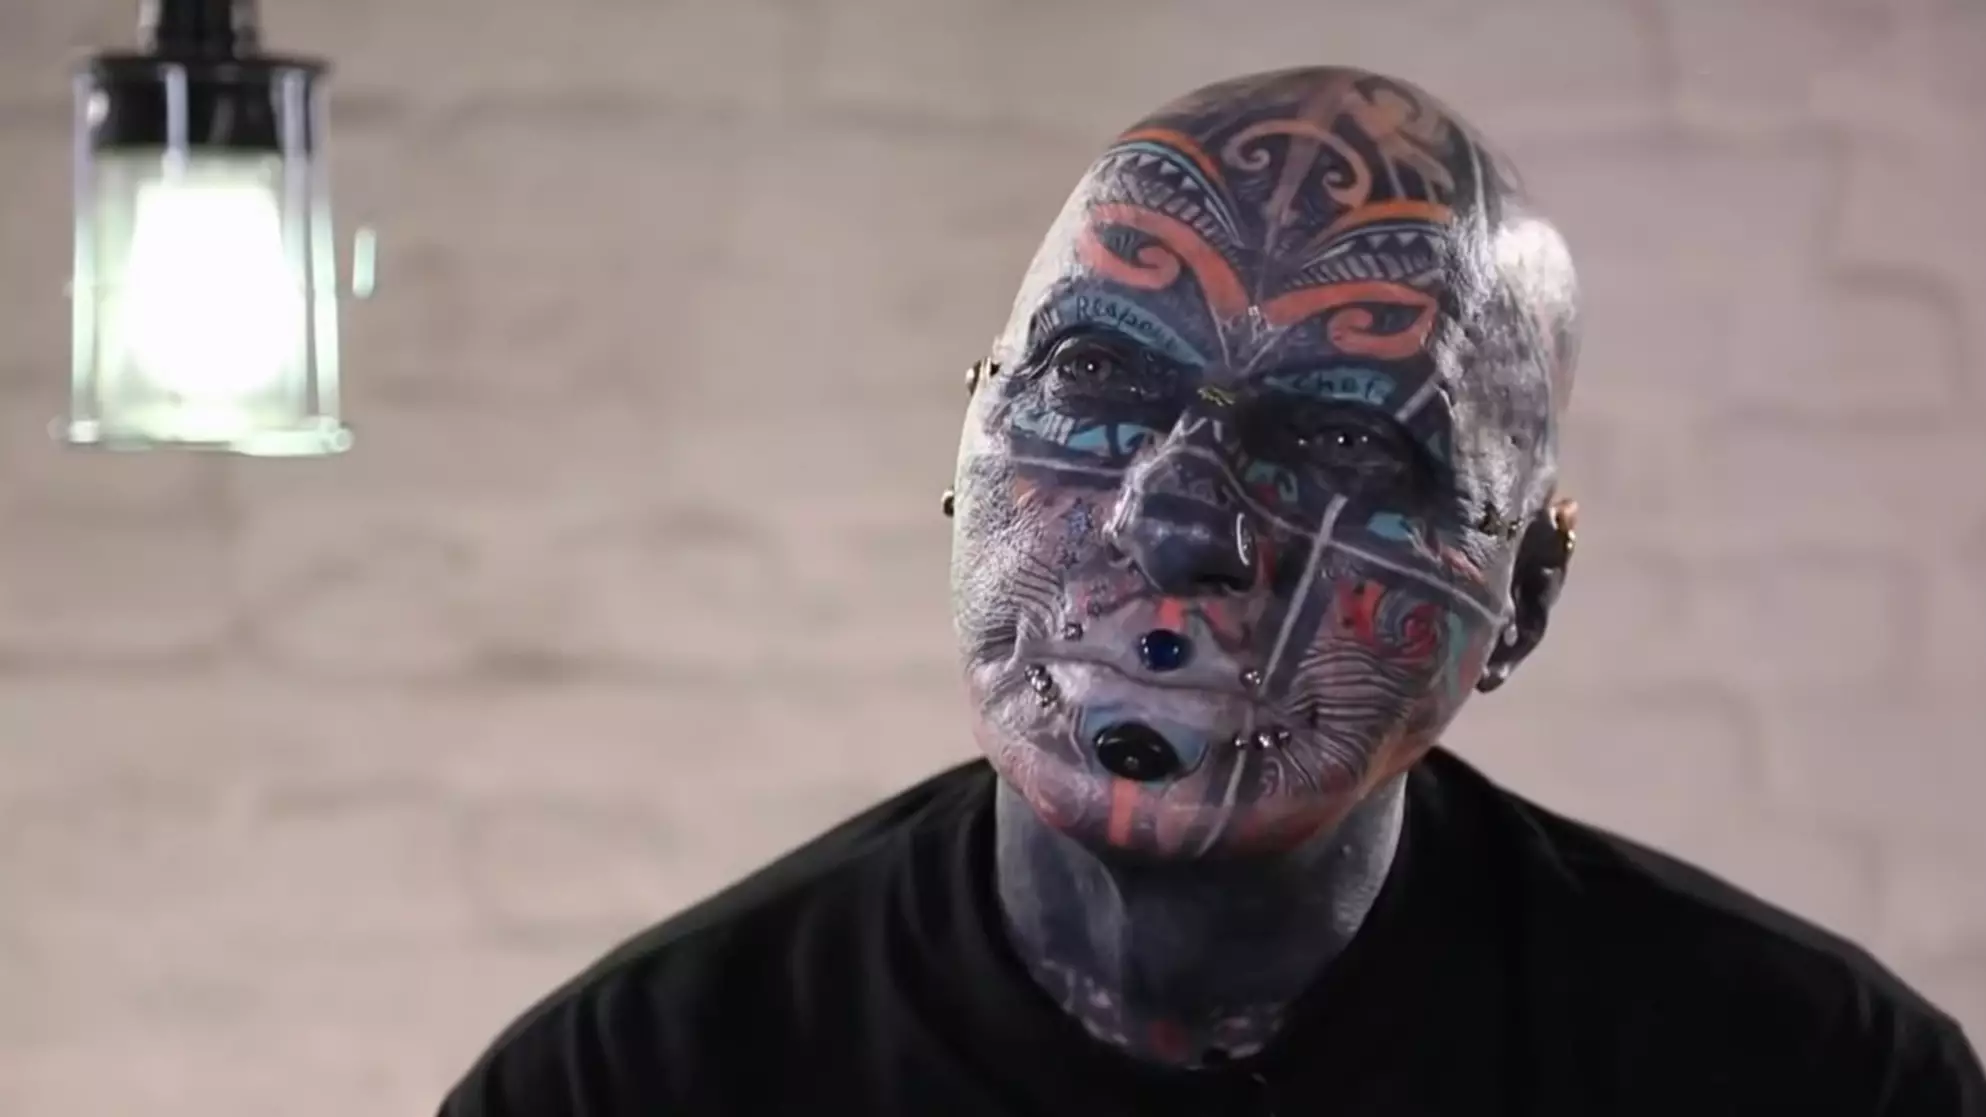 ​OAP Has 98 Percent Of His Body Covered In Tattoos